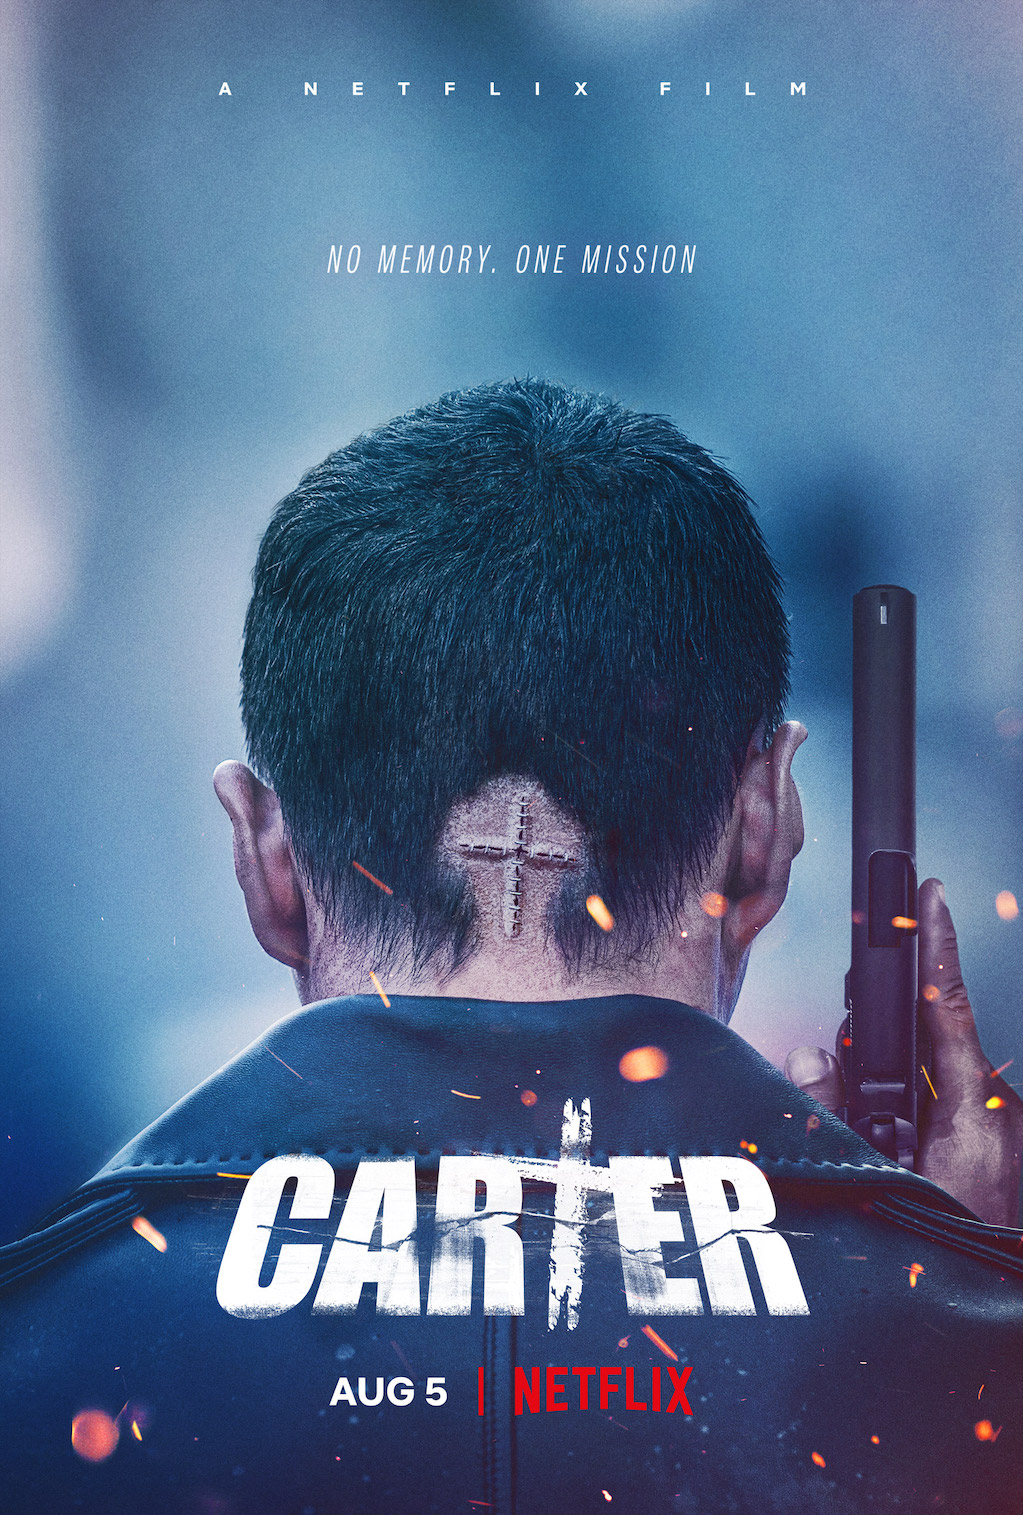 Is Carter (2022) available on Netflix